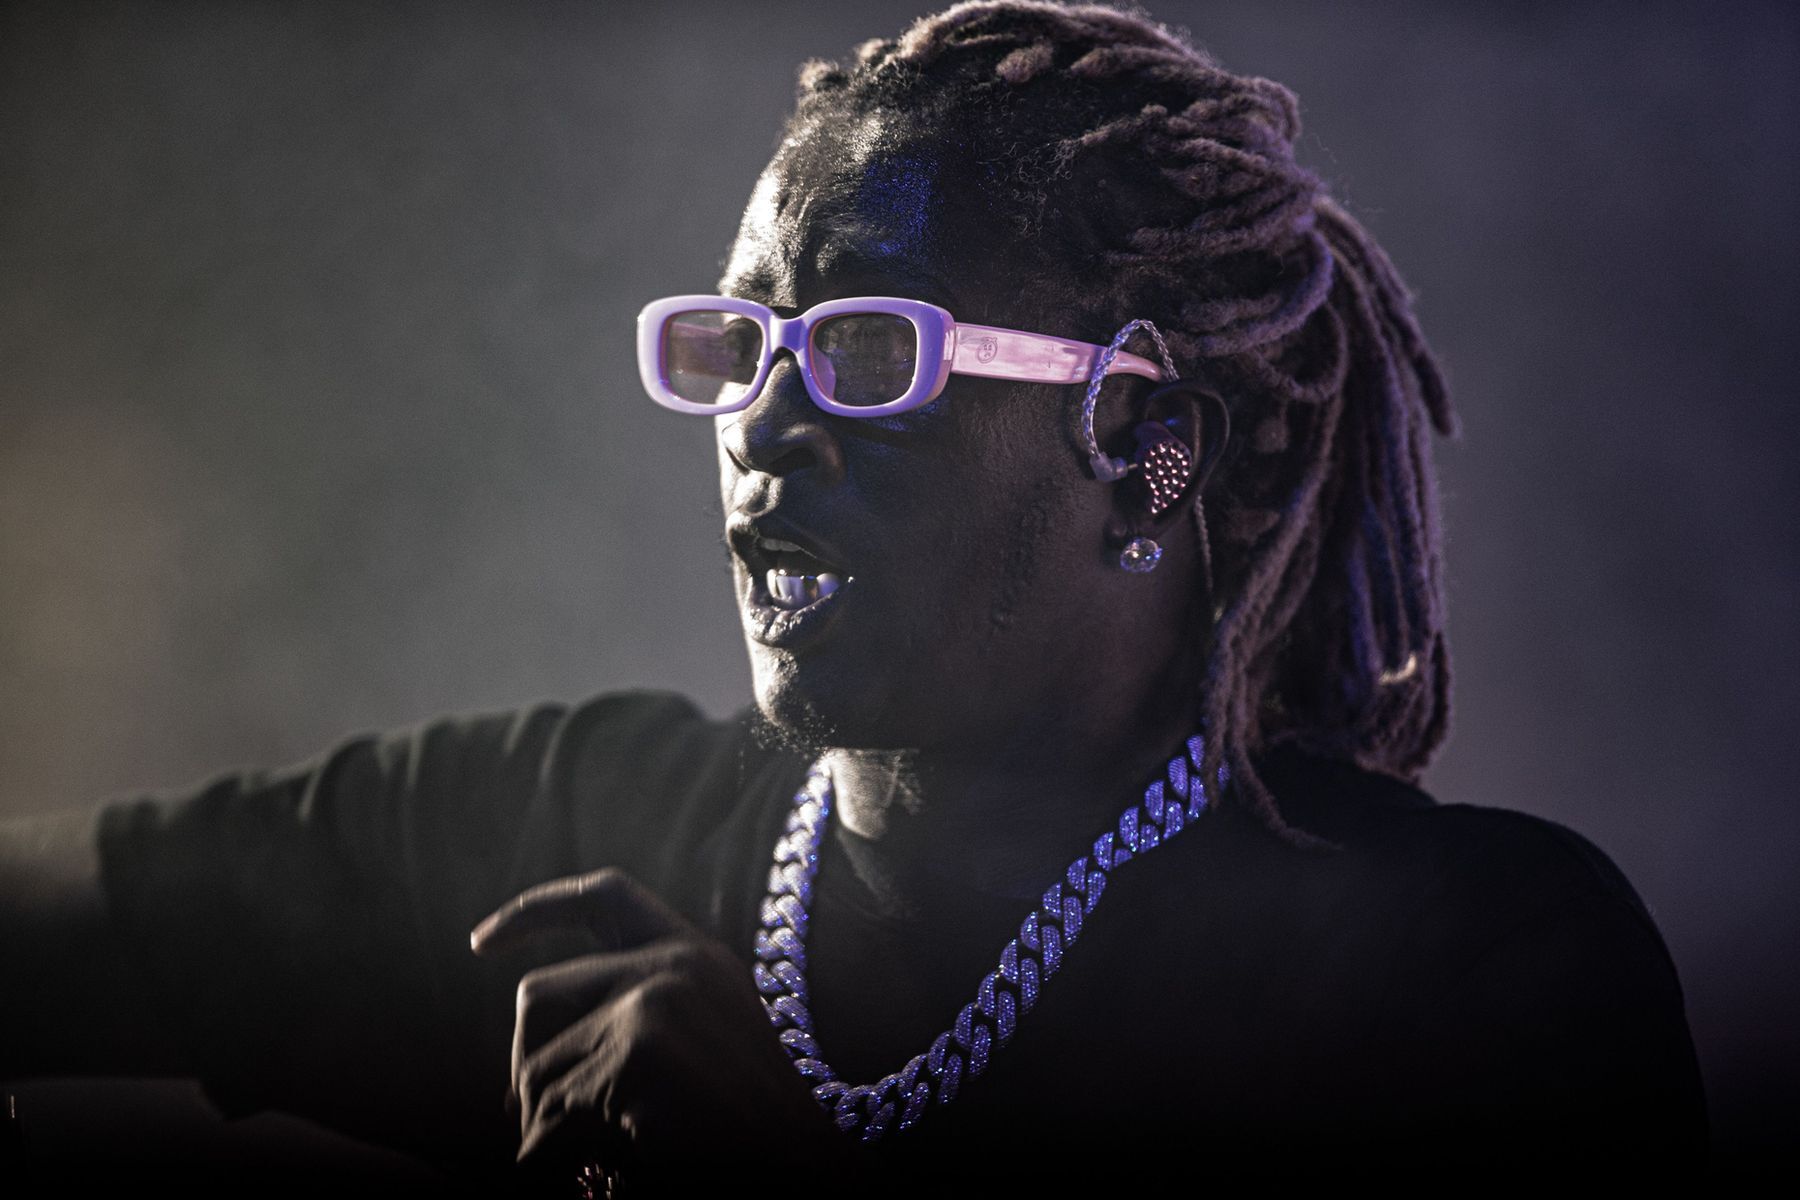 <p><a href="https://hiphopdx.com/news/id.65767/title.lil-uzi-vert-young-thug-xxxtentacion-soundcloud-greats">In 2021, SoundCloud paid tribute</a> to some of its greatest success stories, including rapper Young Thug, whose 2014 debut on the platform, and songs like the hit “Digits,” propelled him to fame. “His work and legacy serve as a reminder of the power of originality and experimentation in music,” SoundCloud said on social media. Born <a href="https://musicbrainz.org/artist/800760de-bdf8-43a2-8fe0-44a2401a5515">Jeffery Lamar Williams</a>, the rapper has collaborated on several hit songs, including “Havana” by Camila Cabello and “This Is America” with Childish Gambino, which also won a 2019 Grammy for Song of the Year. His debut studio album, <em>So Much Fun</em>, hit No. 1 on the Billboard 200. In 2022, Young Thug was <a href="https://hollywoodlife.com/feature/who-is-young-thug-rapper-4731052/">arrested on racketeering charges</a> due to his alleged connection to street-gang activity. </p>